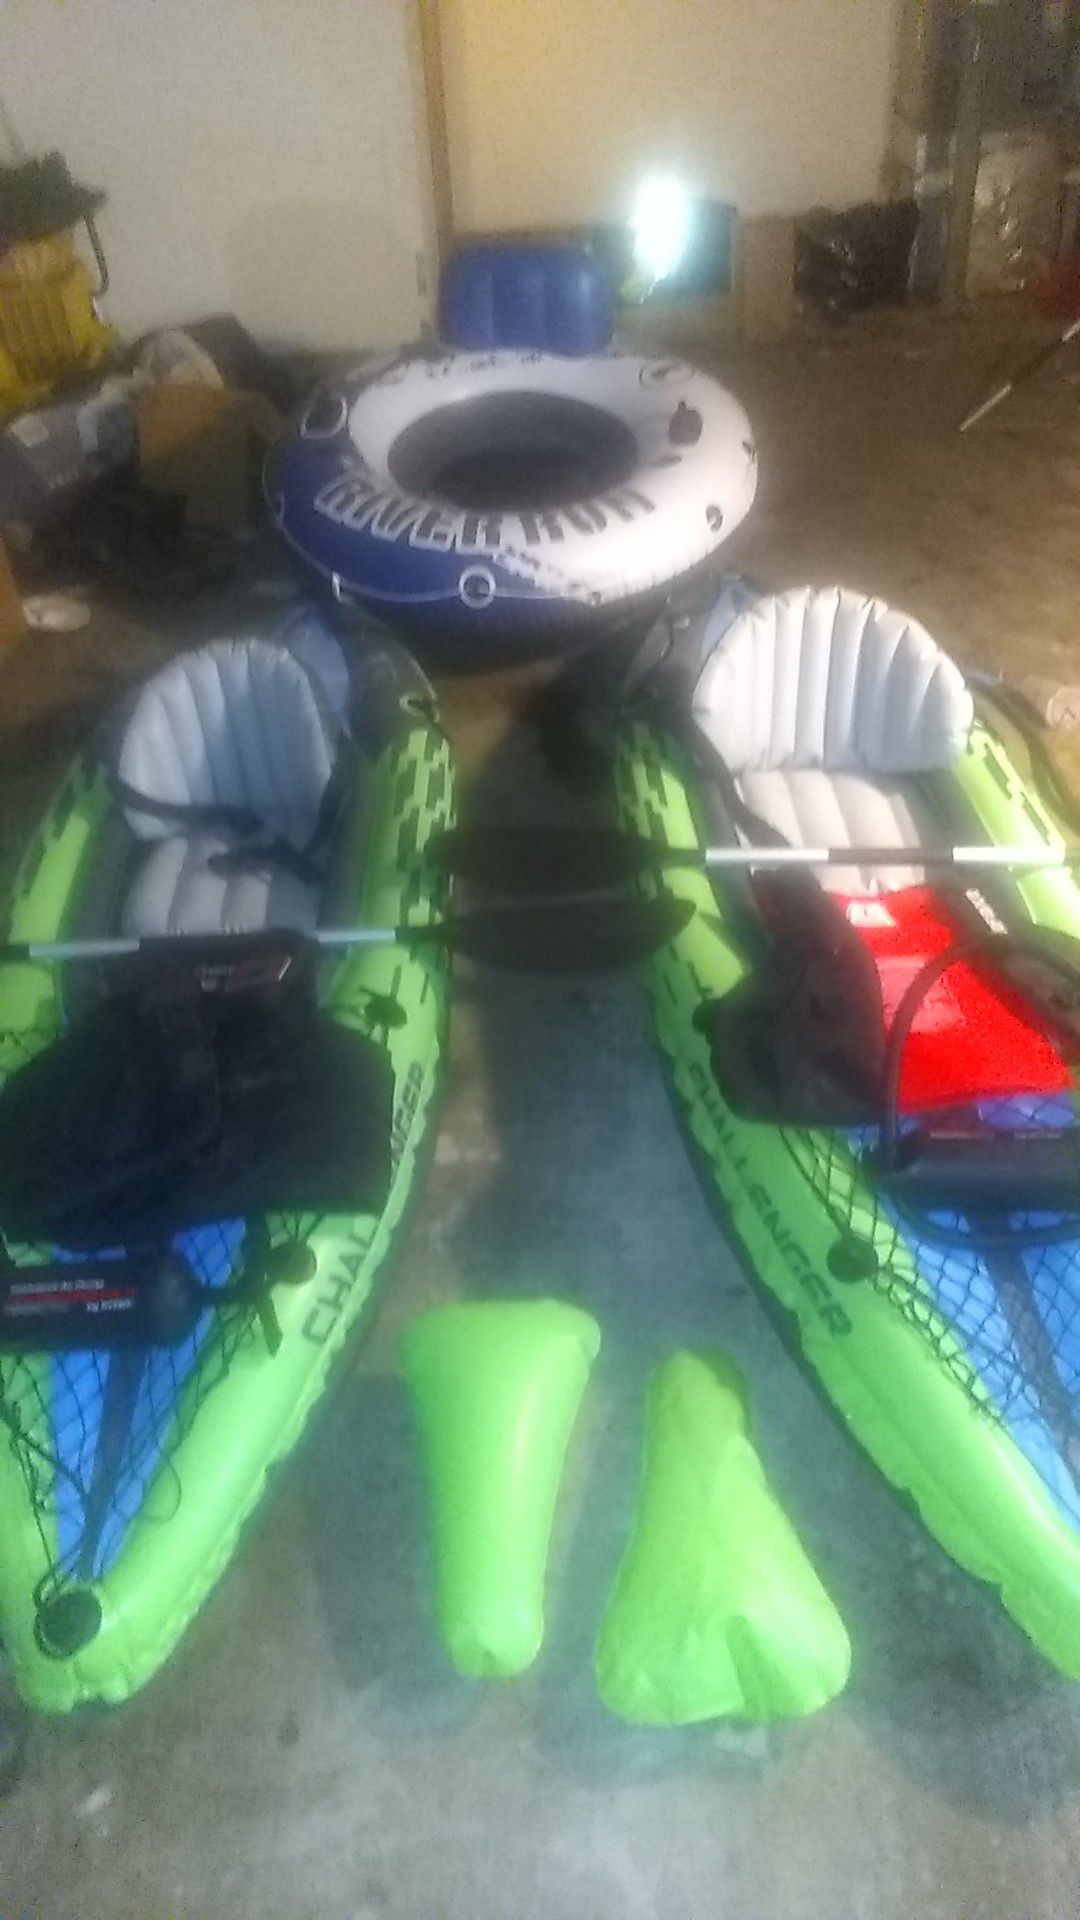 The Challenger k1 index kayak with two life vest two oars two pumps add an extra River to